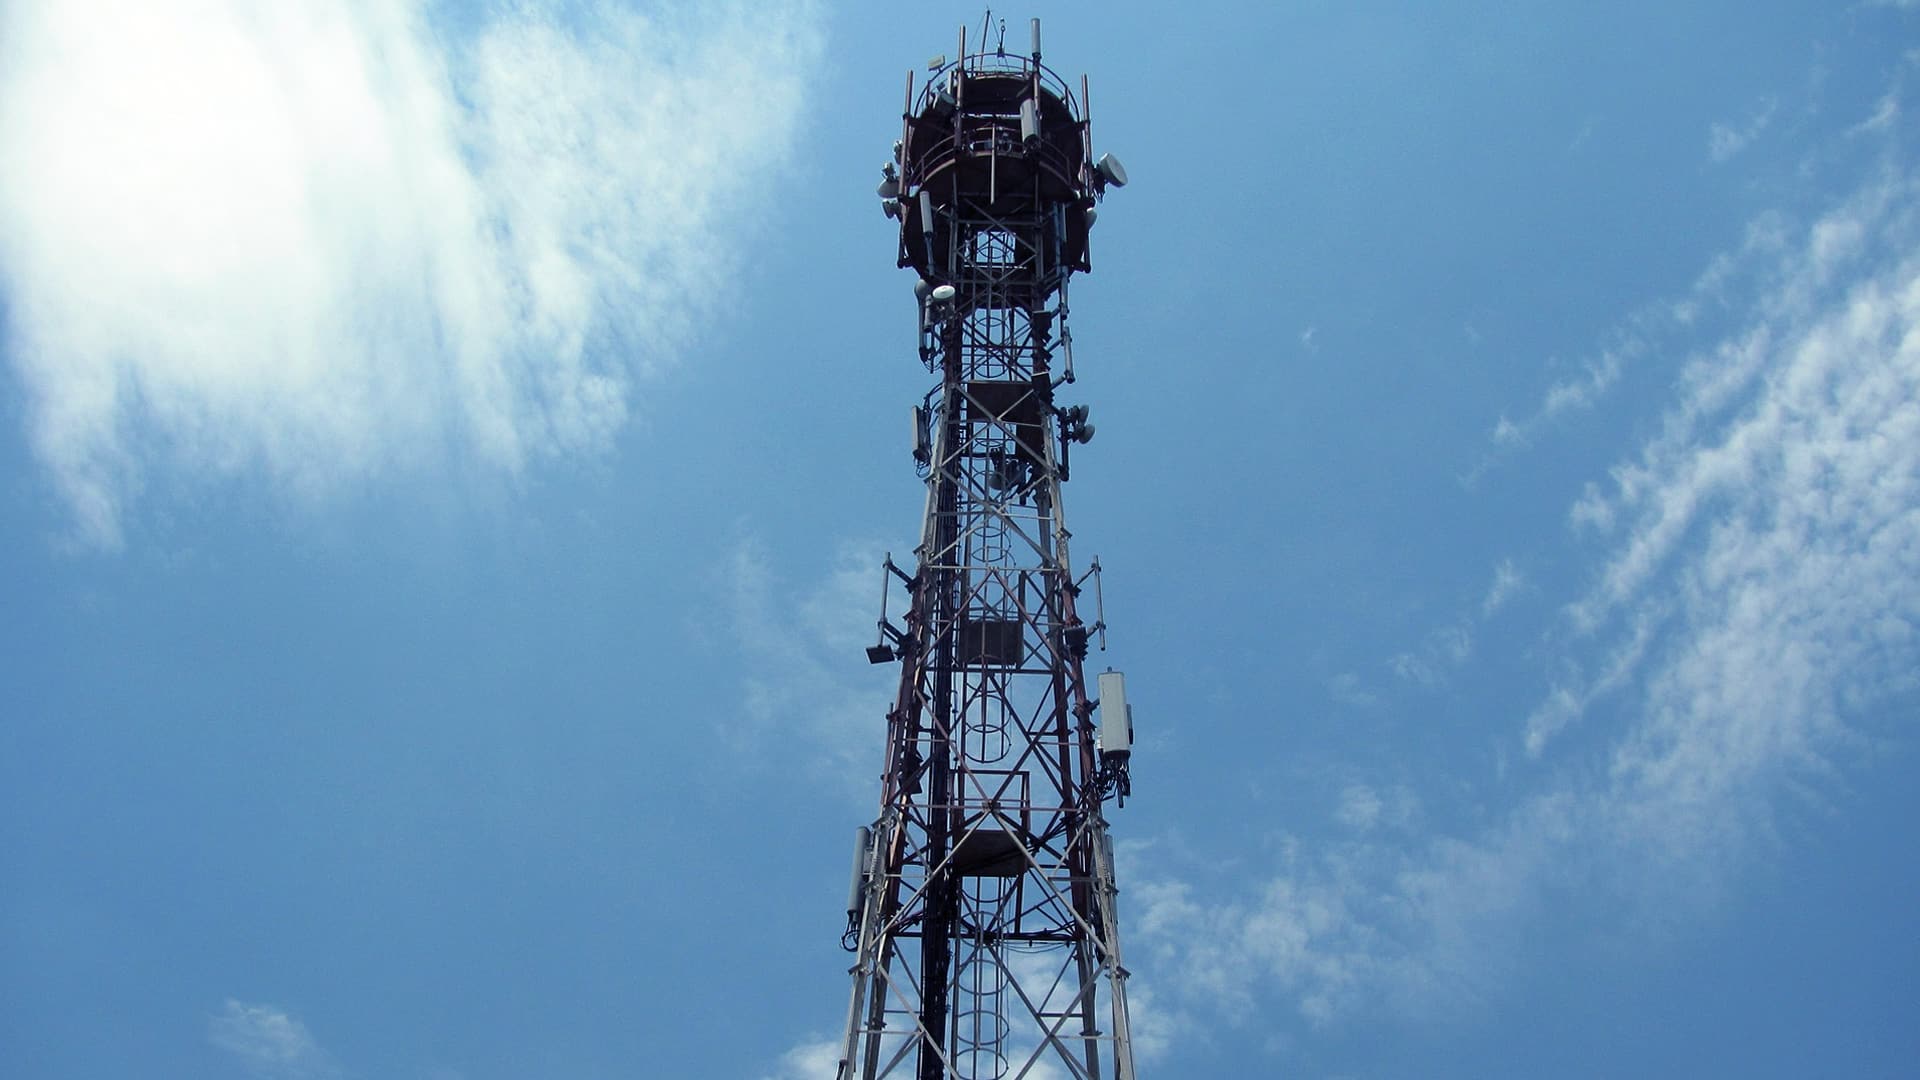 Access to foreign, Indian telecom gear source code to help govt check snooping- PHDCCI